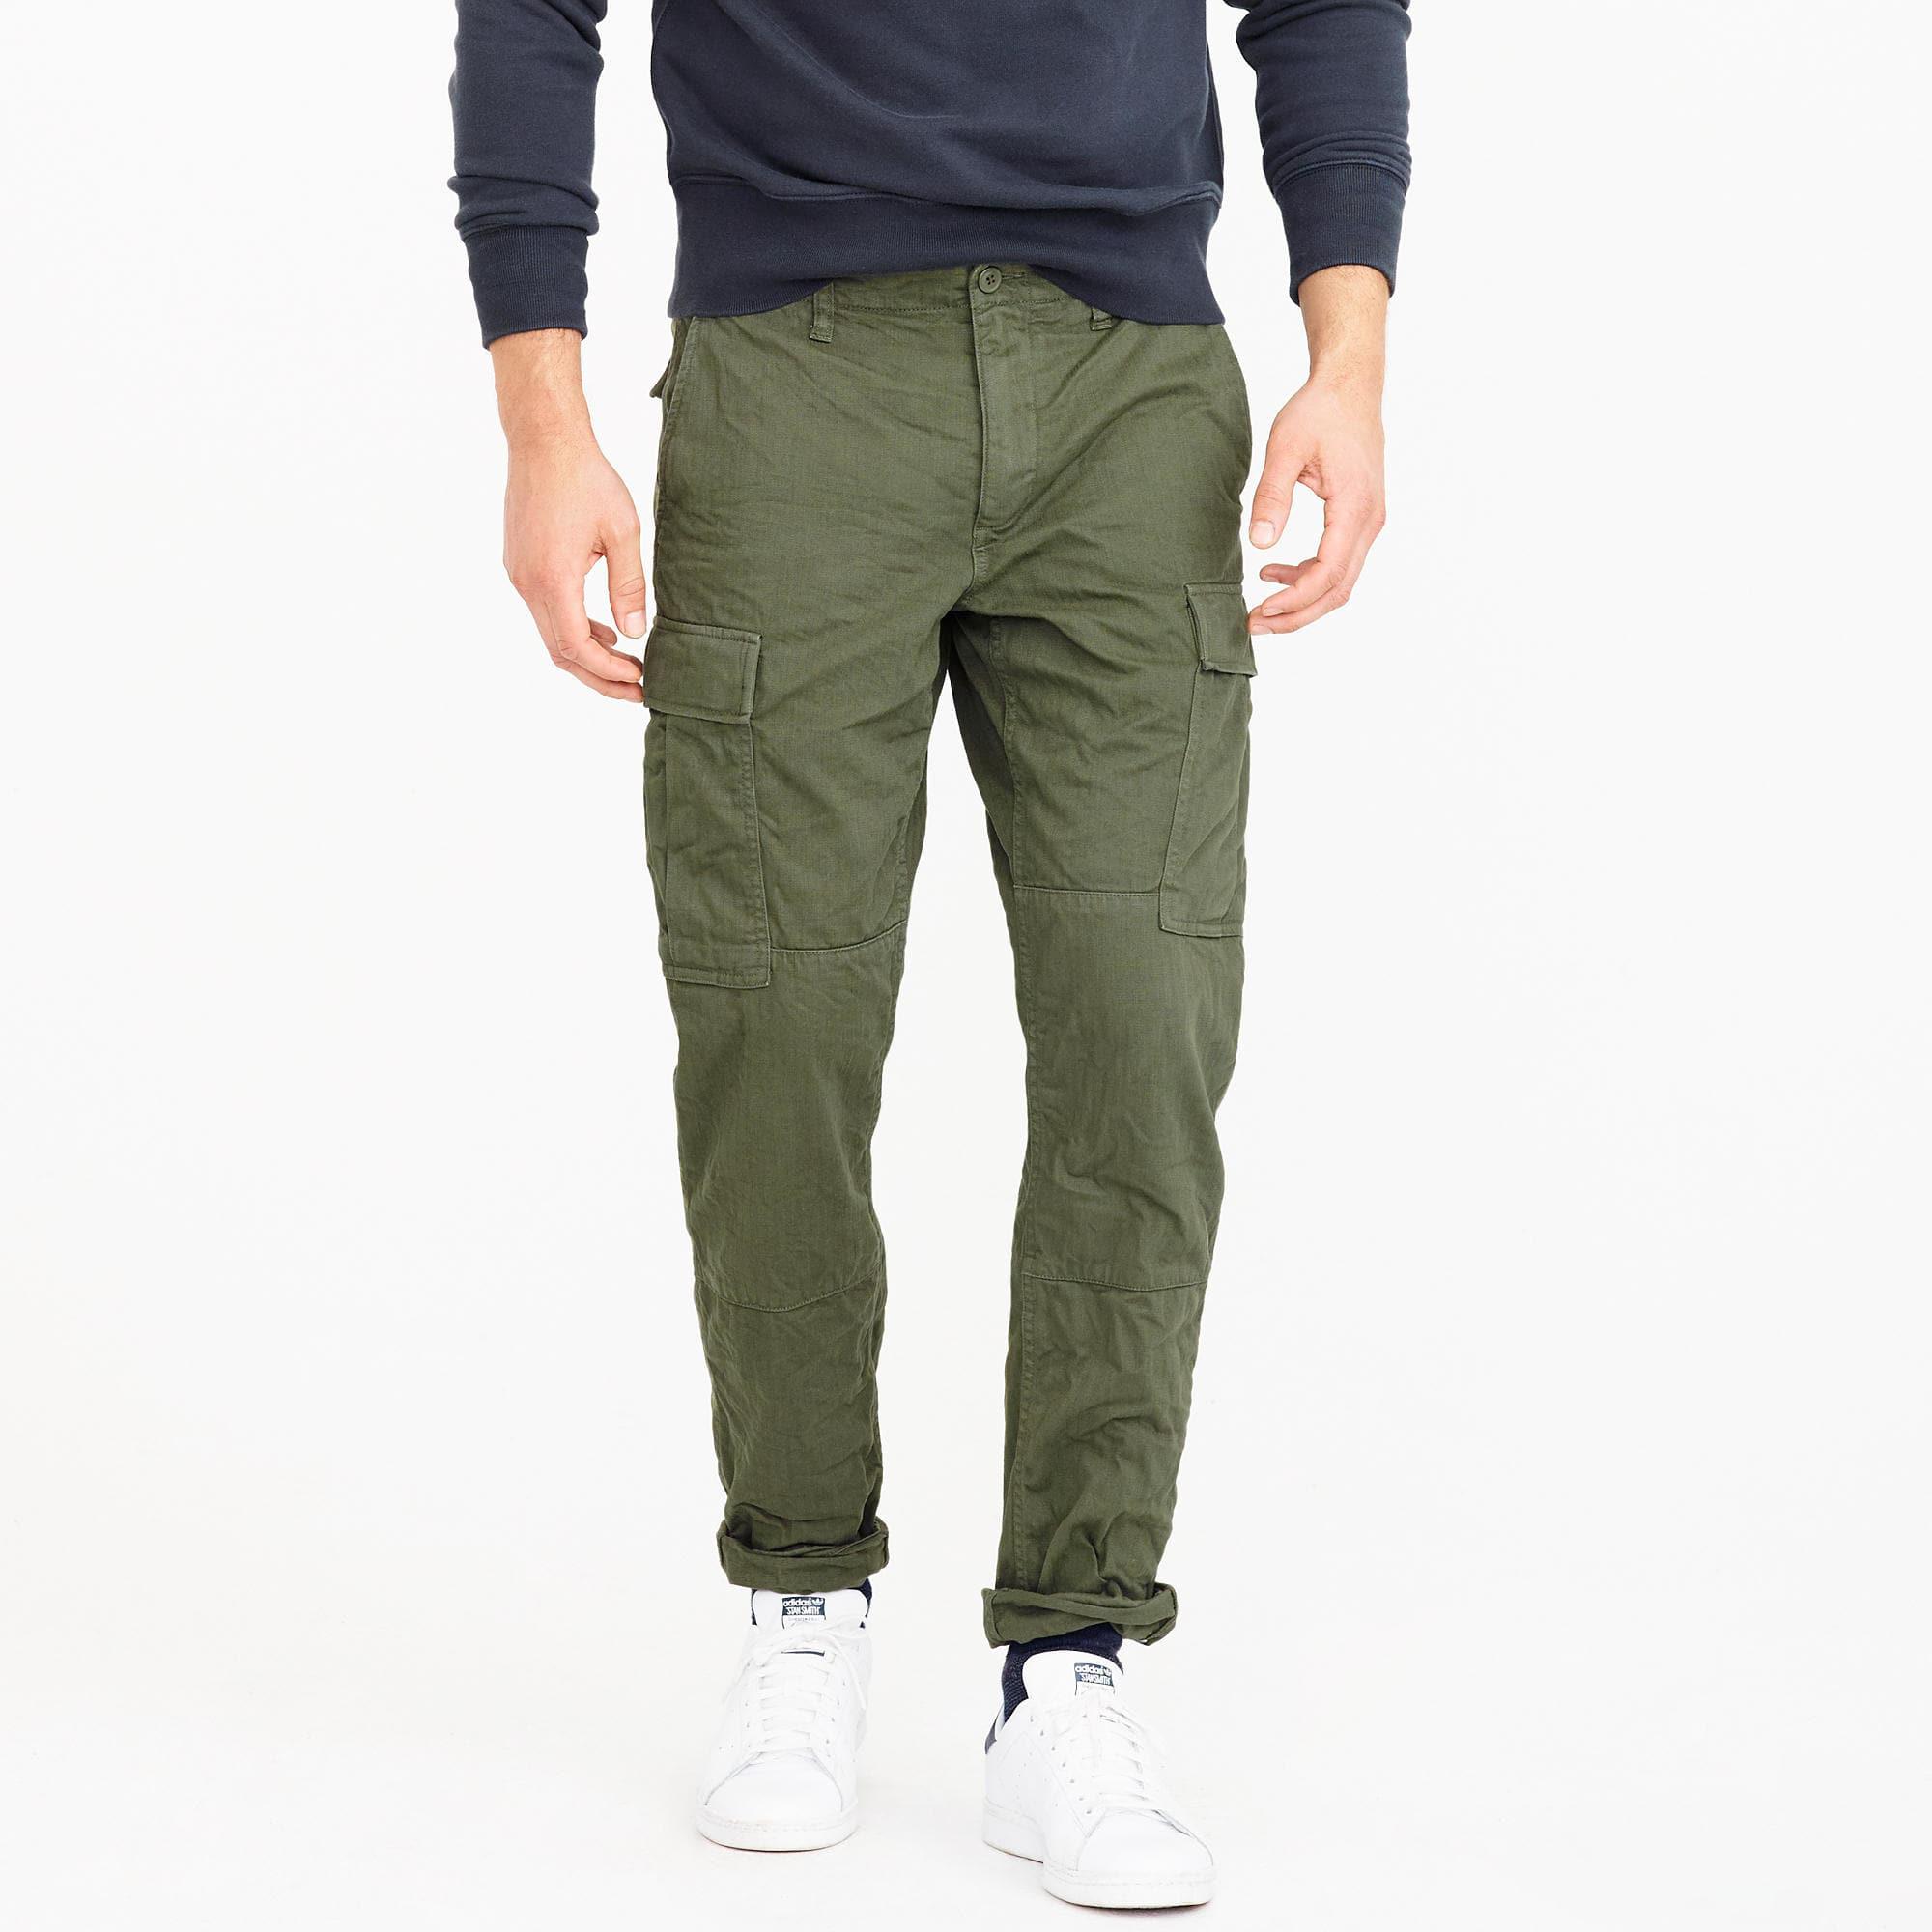 Lyst - J.Crew 770 Straight-fit Cargo Pant in Green for Men